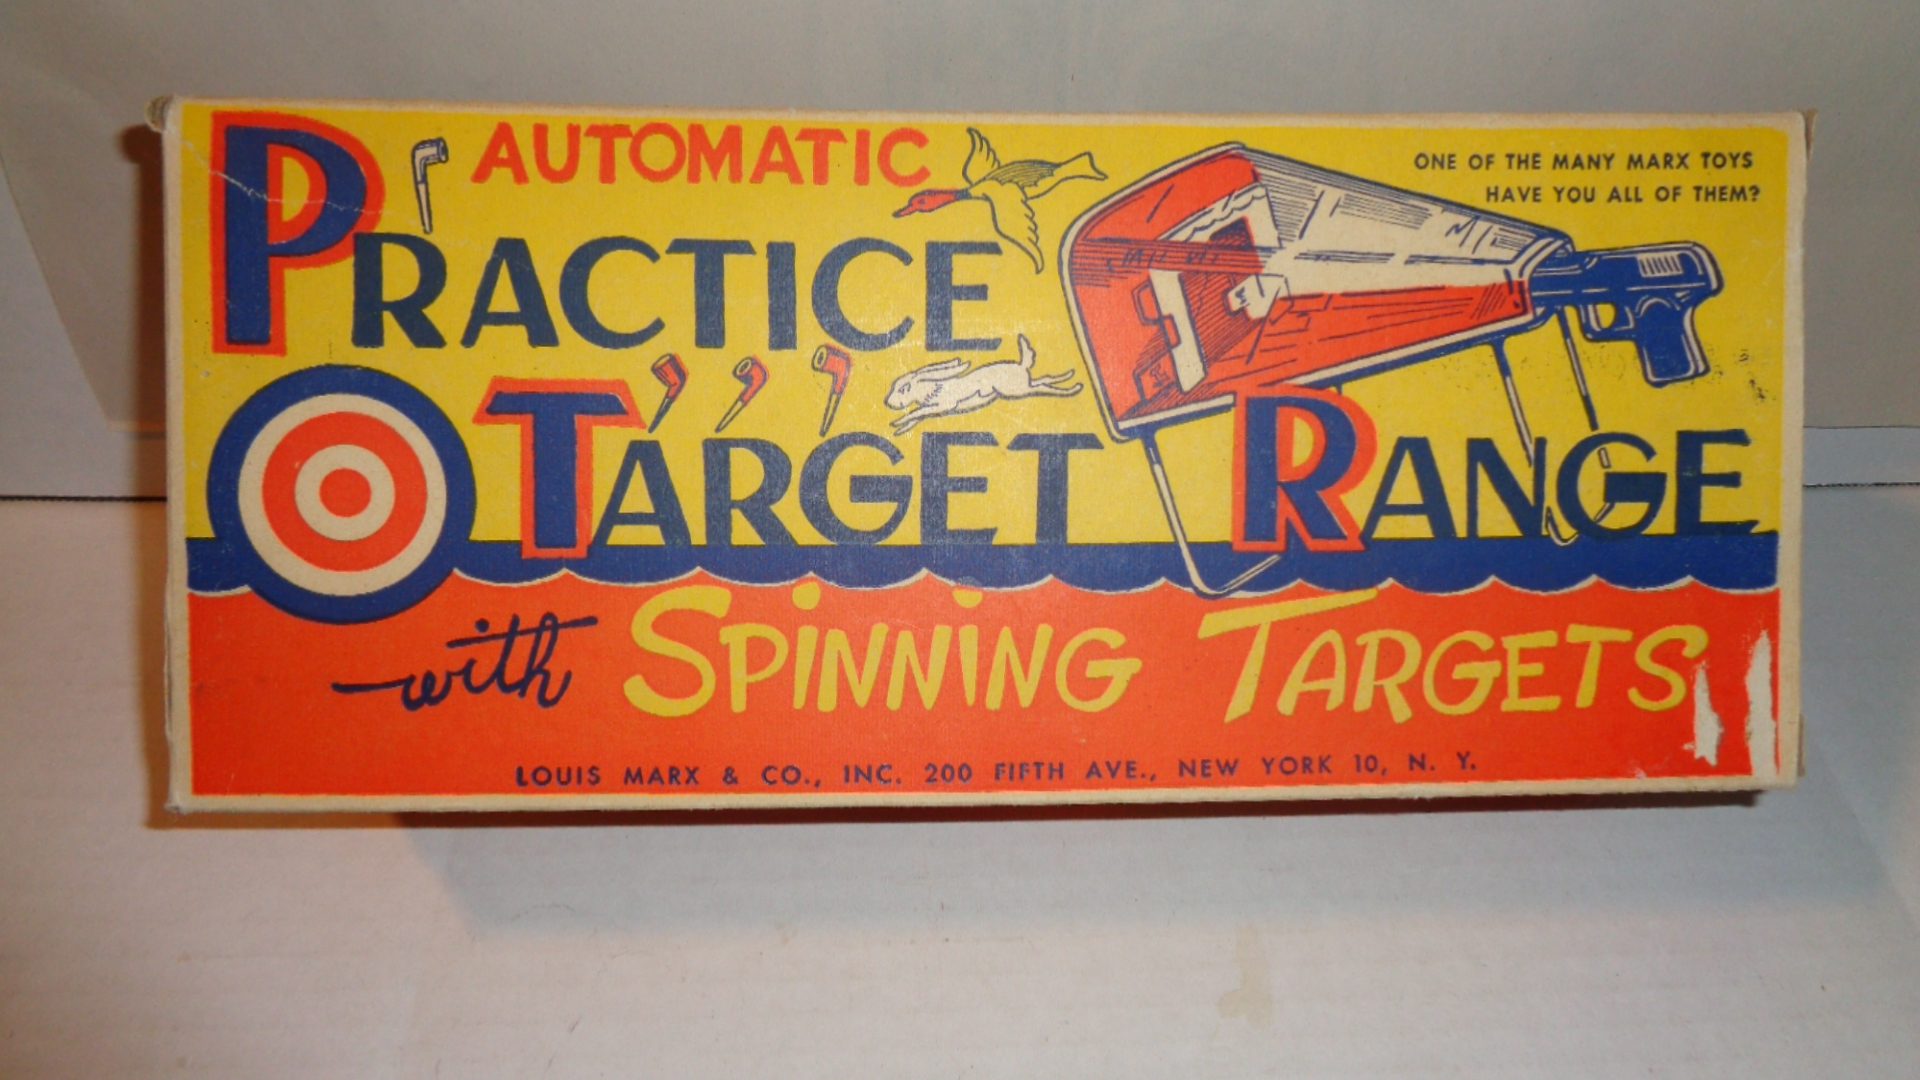 MARX USA, Automatic Practice Target Range Spinning Targets with Original Box